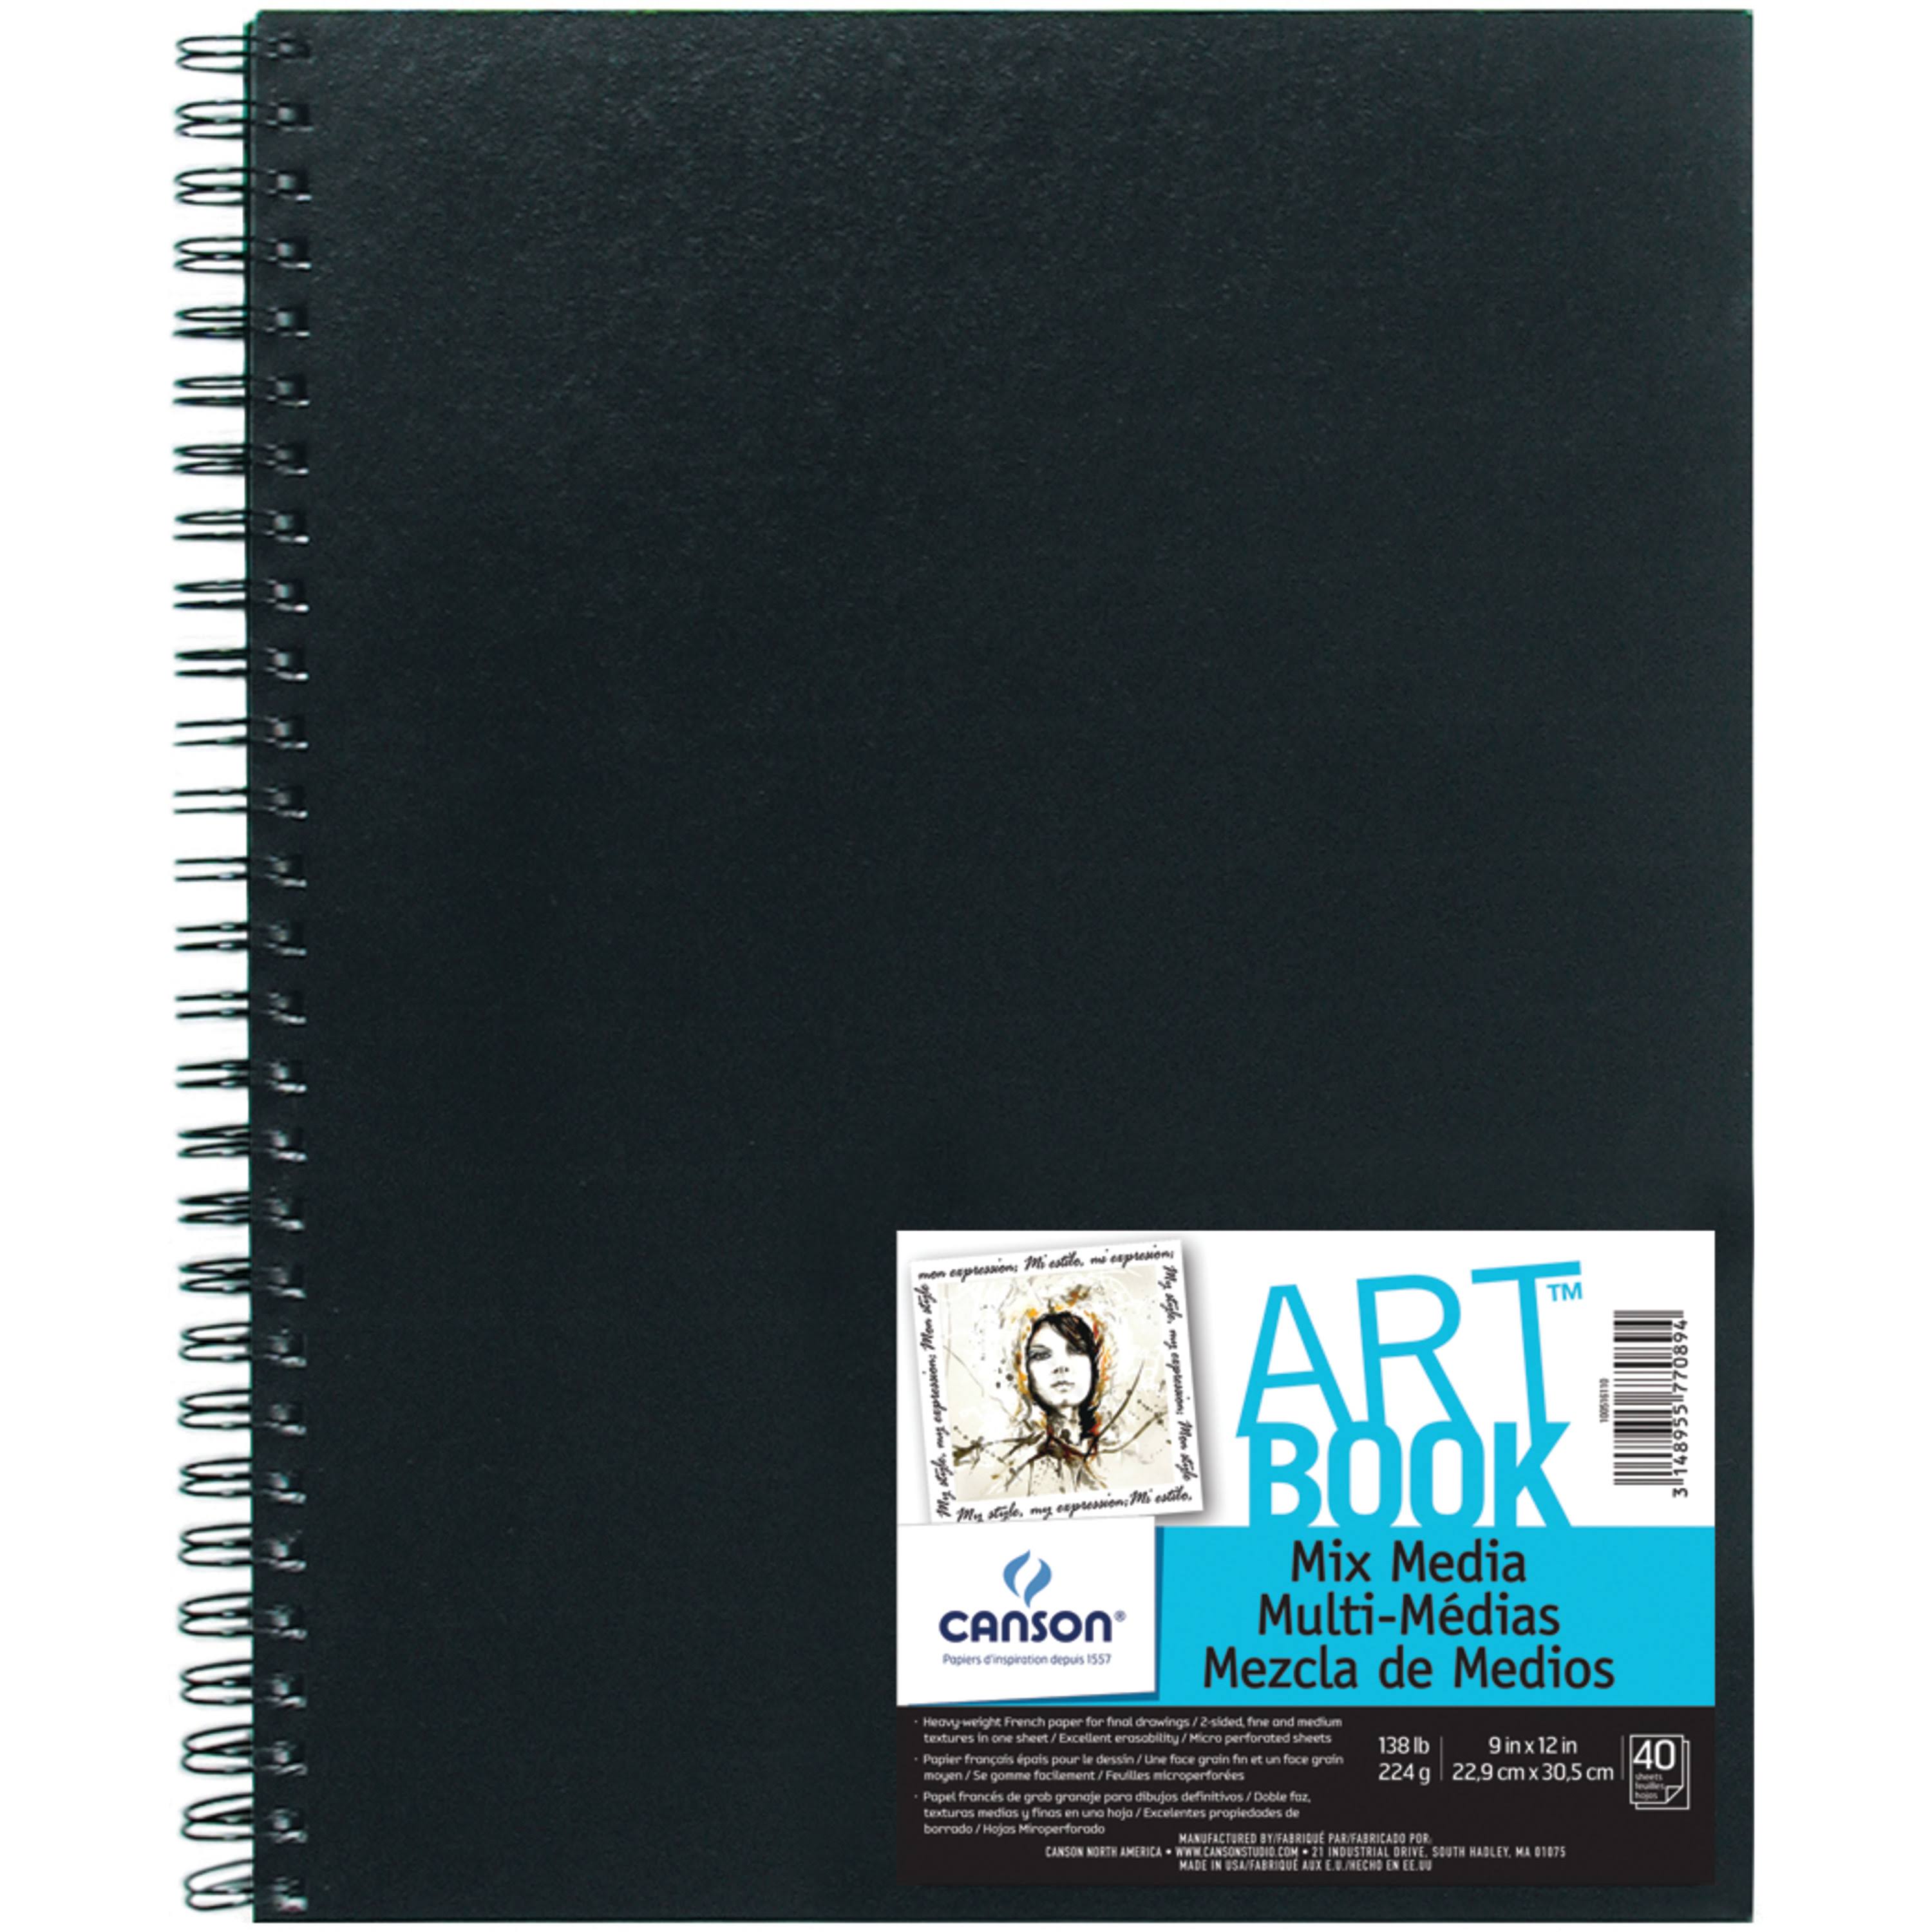 Canson Art Book All Media Watercolor Sketch Book - 9" x 12", 40 Sheets